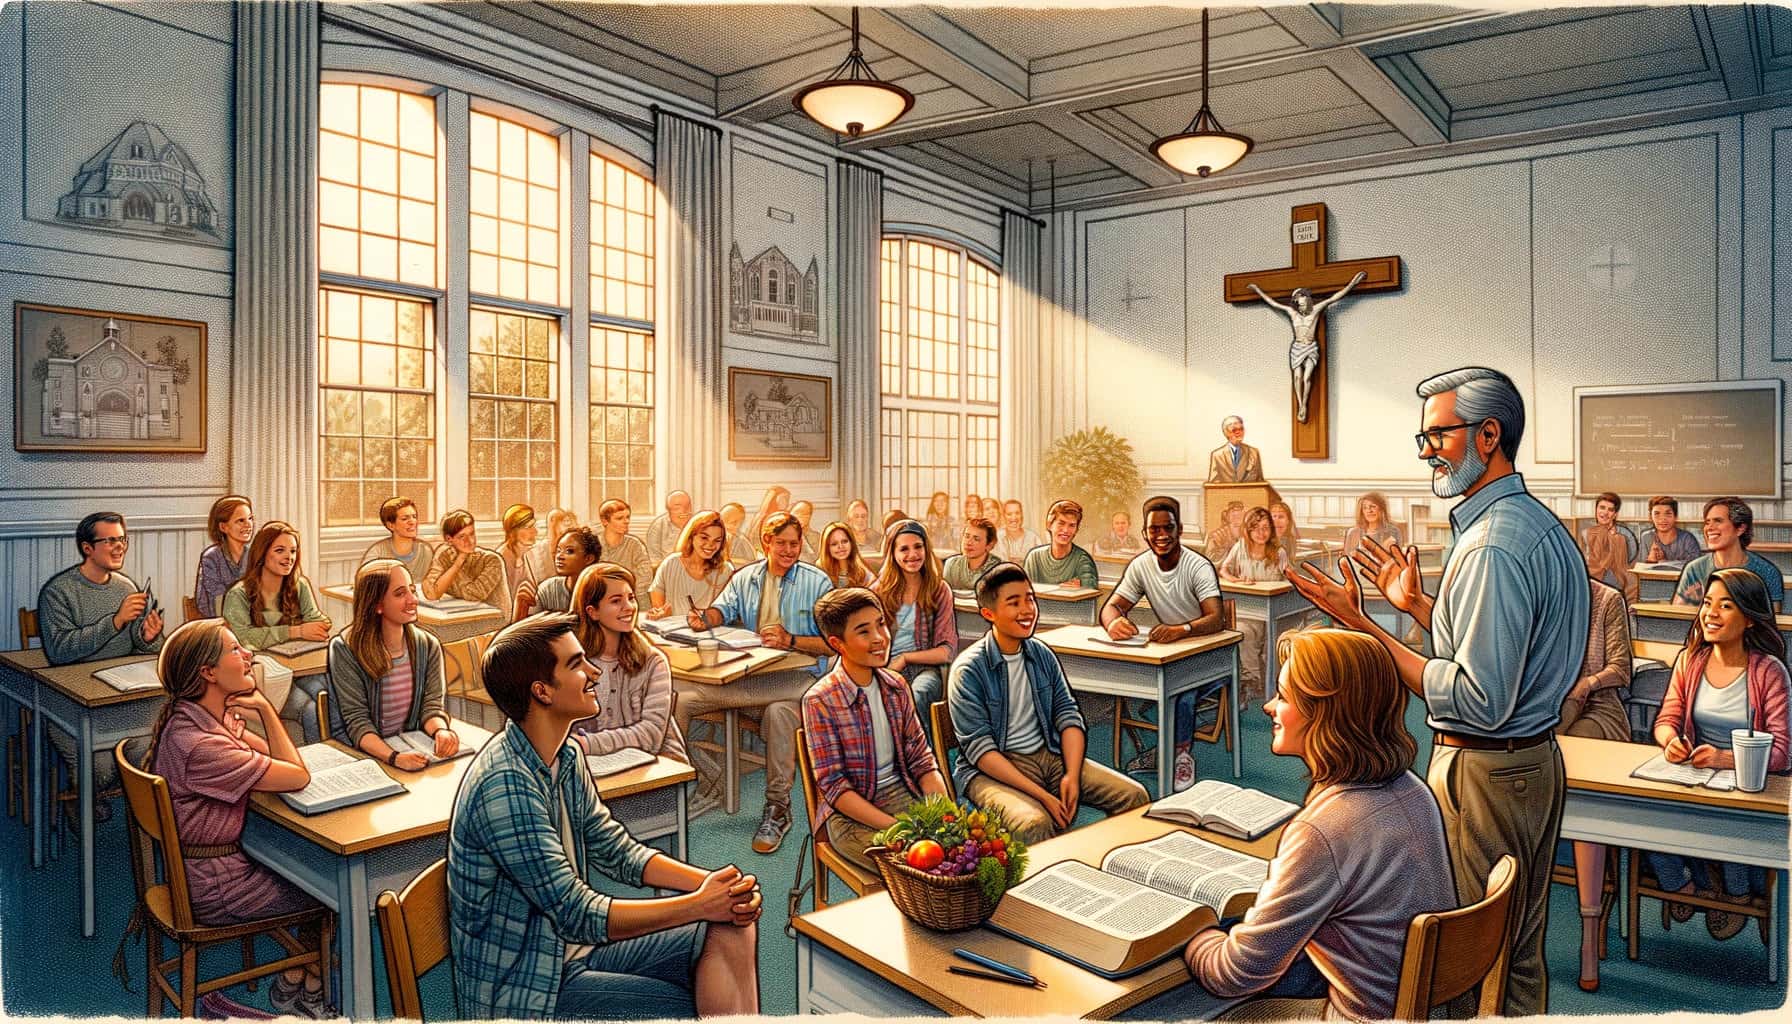 Students in a Classroom Setting with Integrated Faith Elements